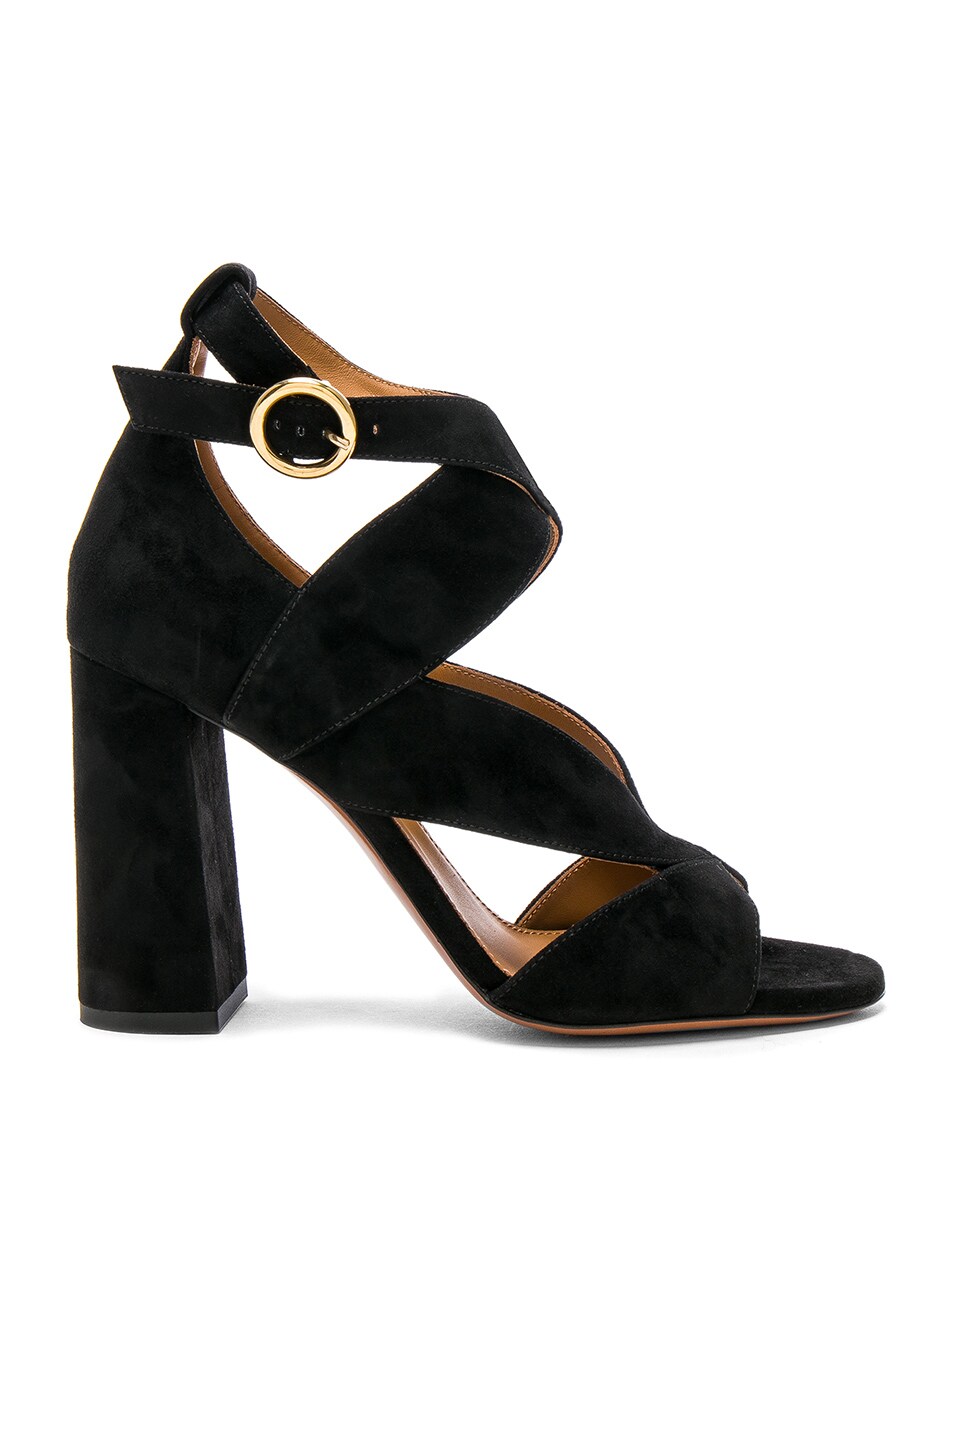 Image 1 of Chloe Suede Graphic Leaves Sandals in Black